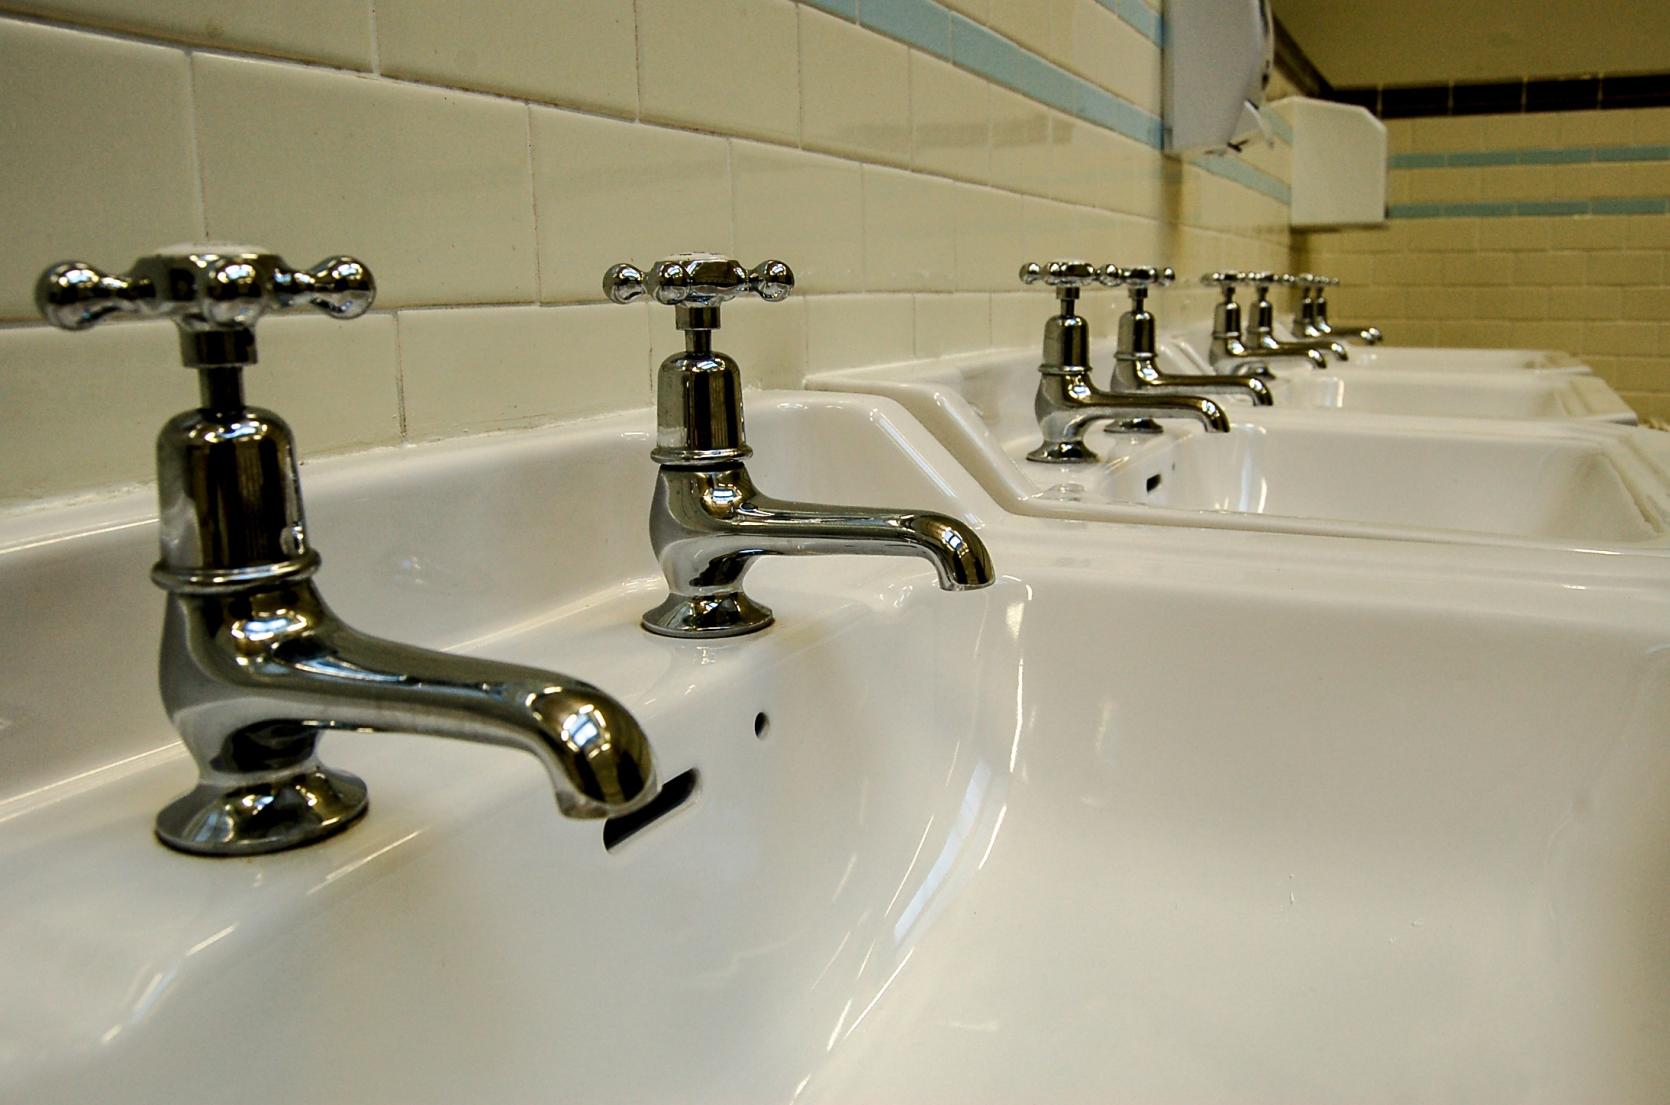 Water faucets